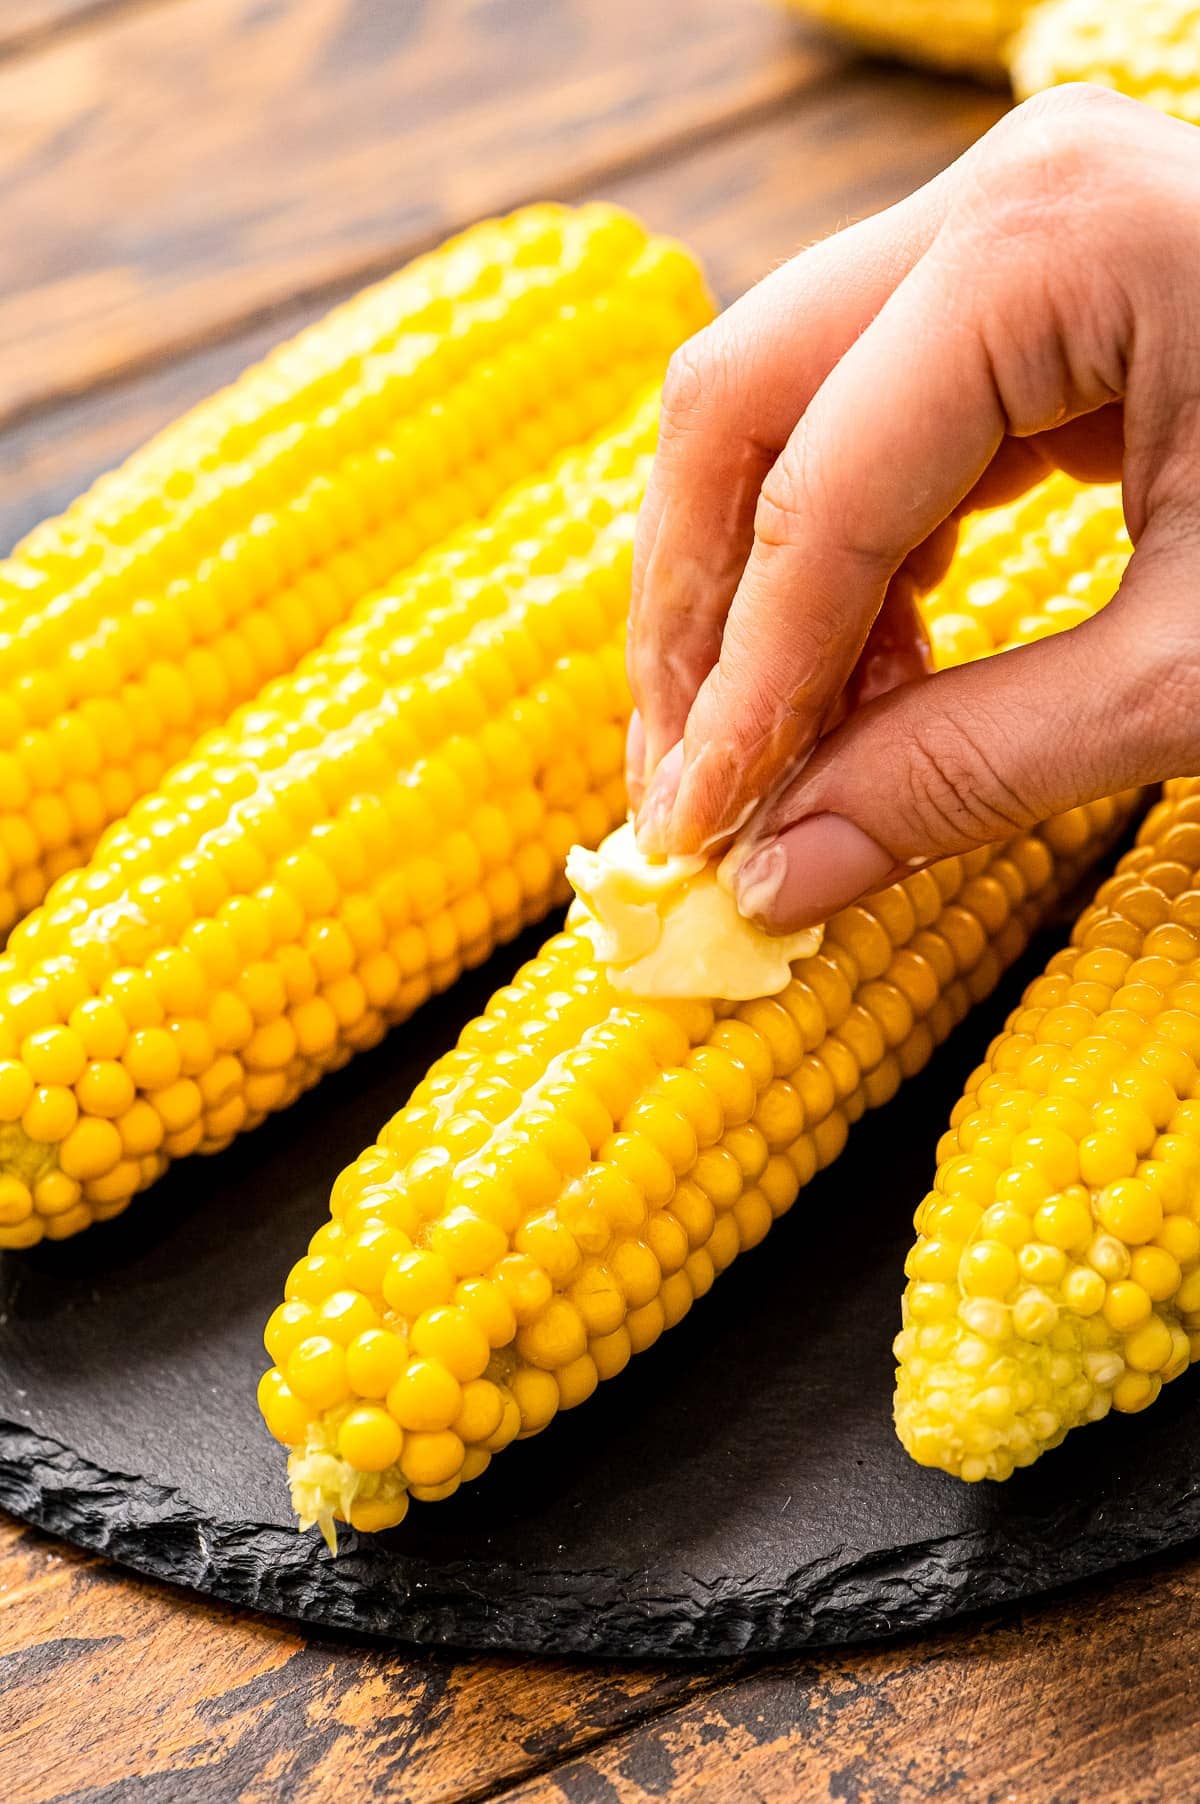 Hand rubbing a slice of butter over a piece of corn on the cob.